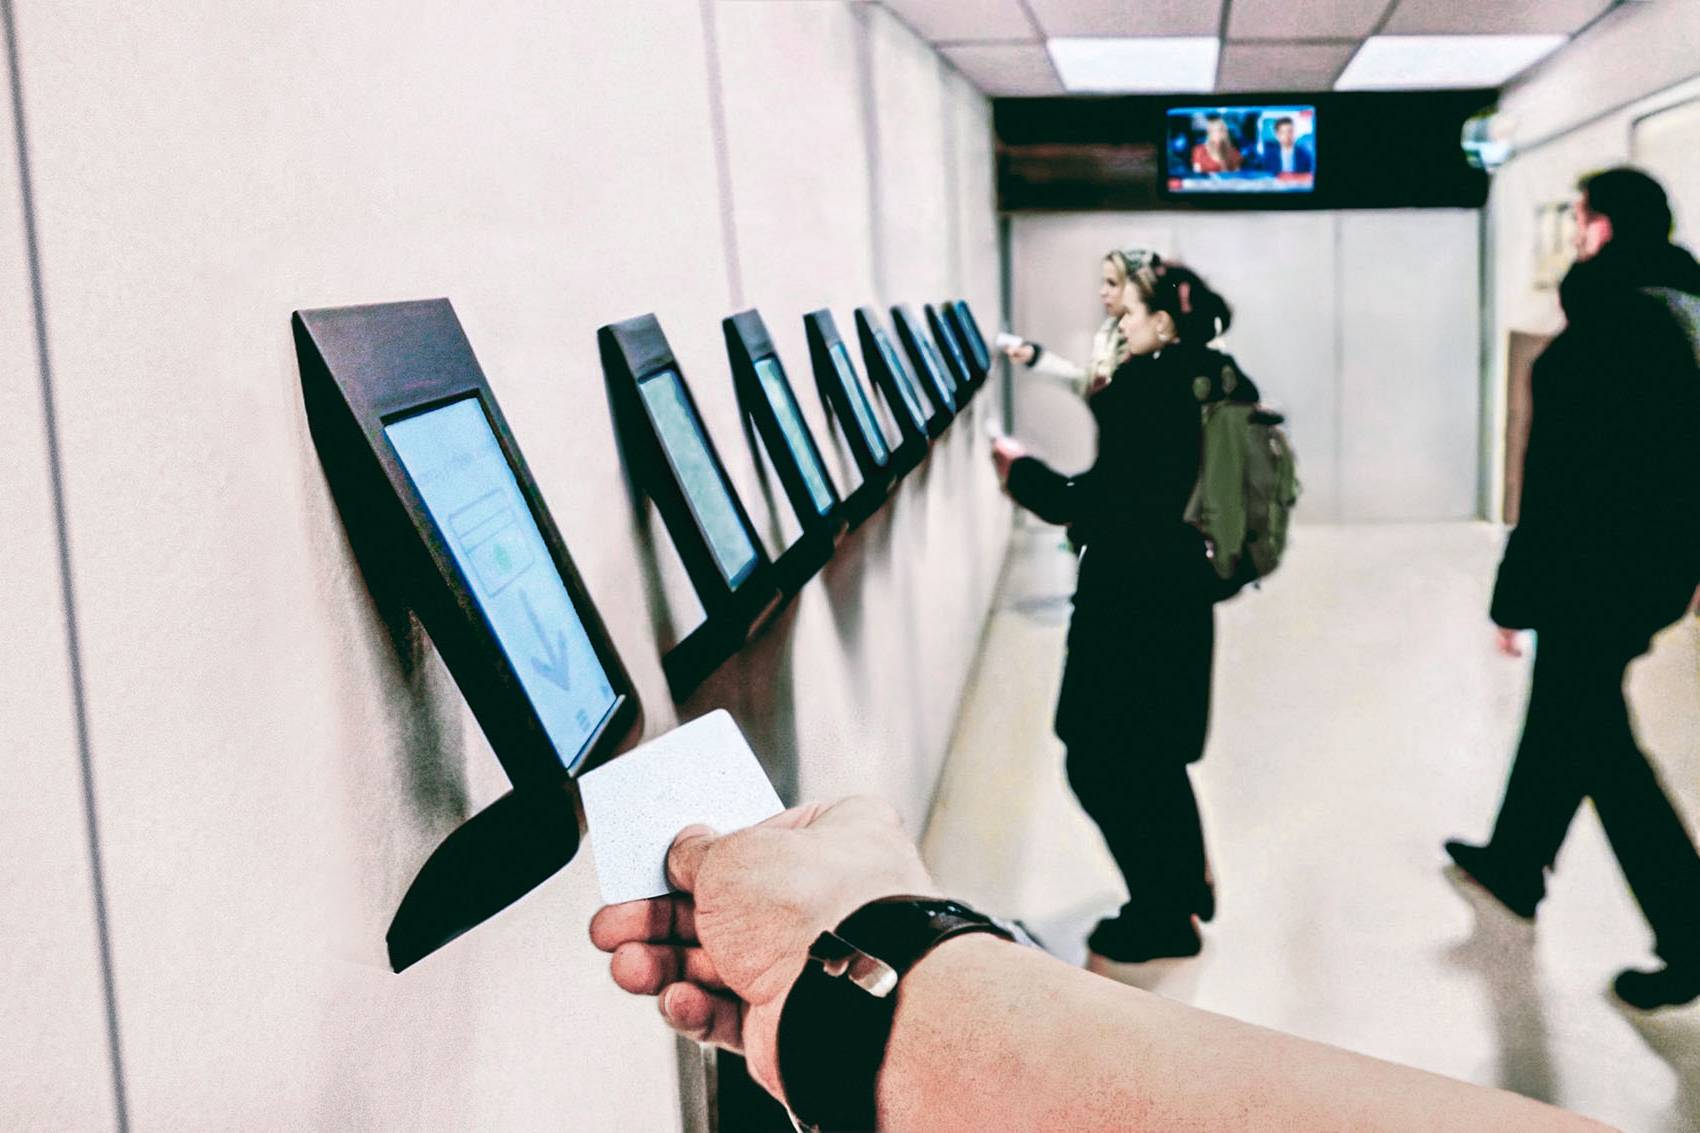 Person taps a electronic keycard at a kiosk awaiting activation of the card.